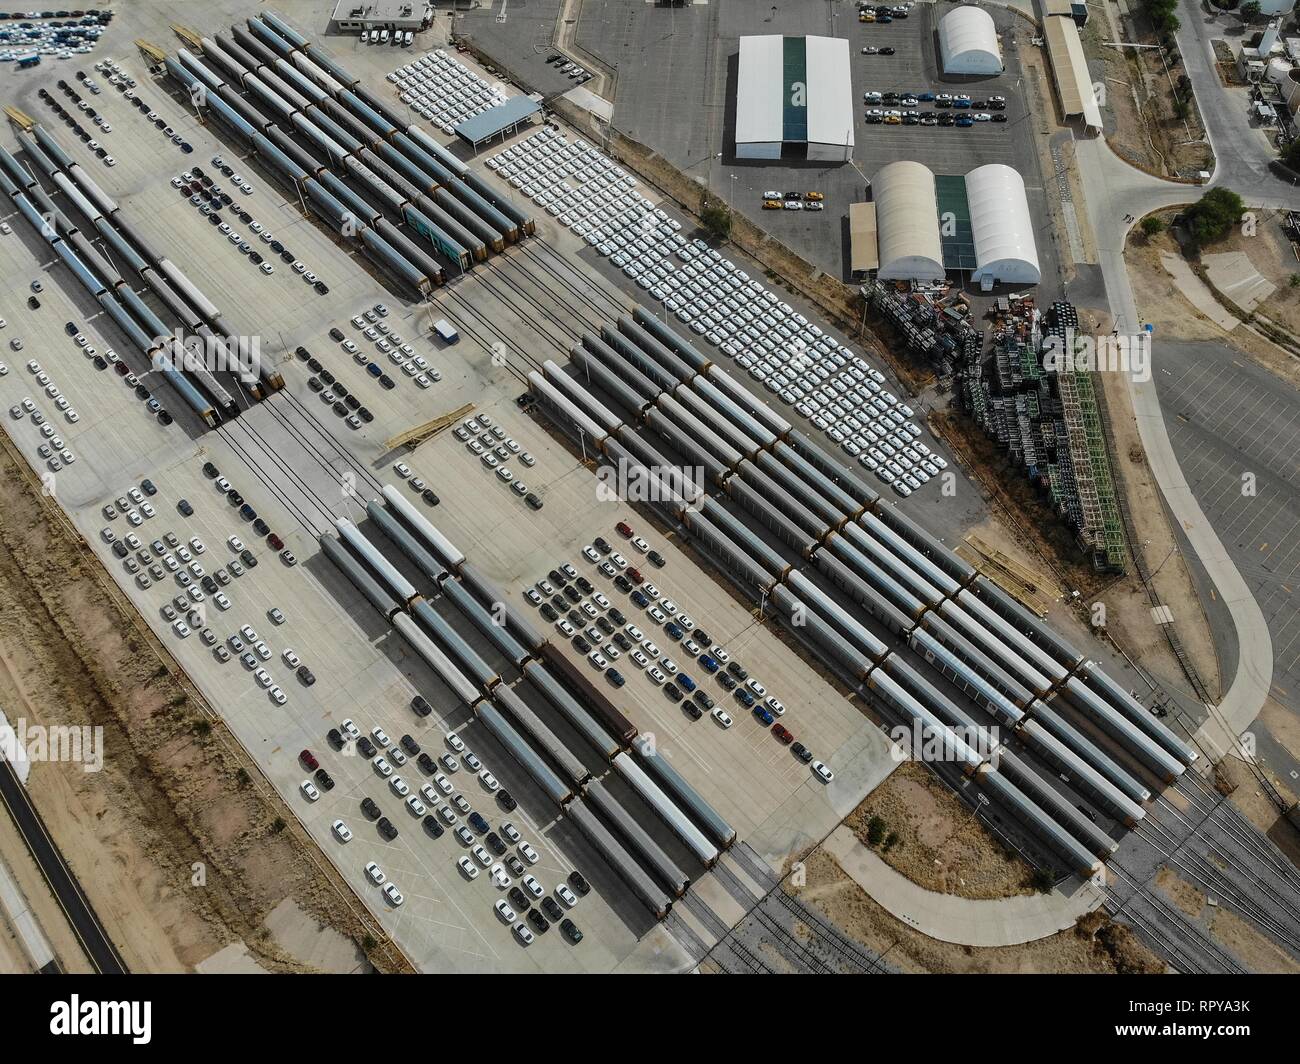 Aerial view of the Ford Motor Company automotive company in the Hermosillo industrial park. Automotive industry. Hermosillo Stamping and Assembly is a Stock Photo